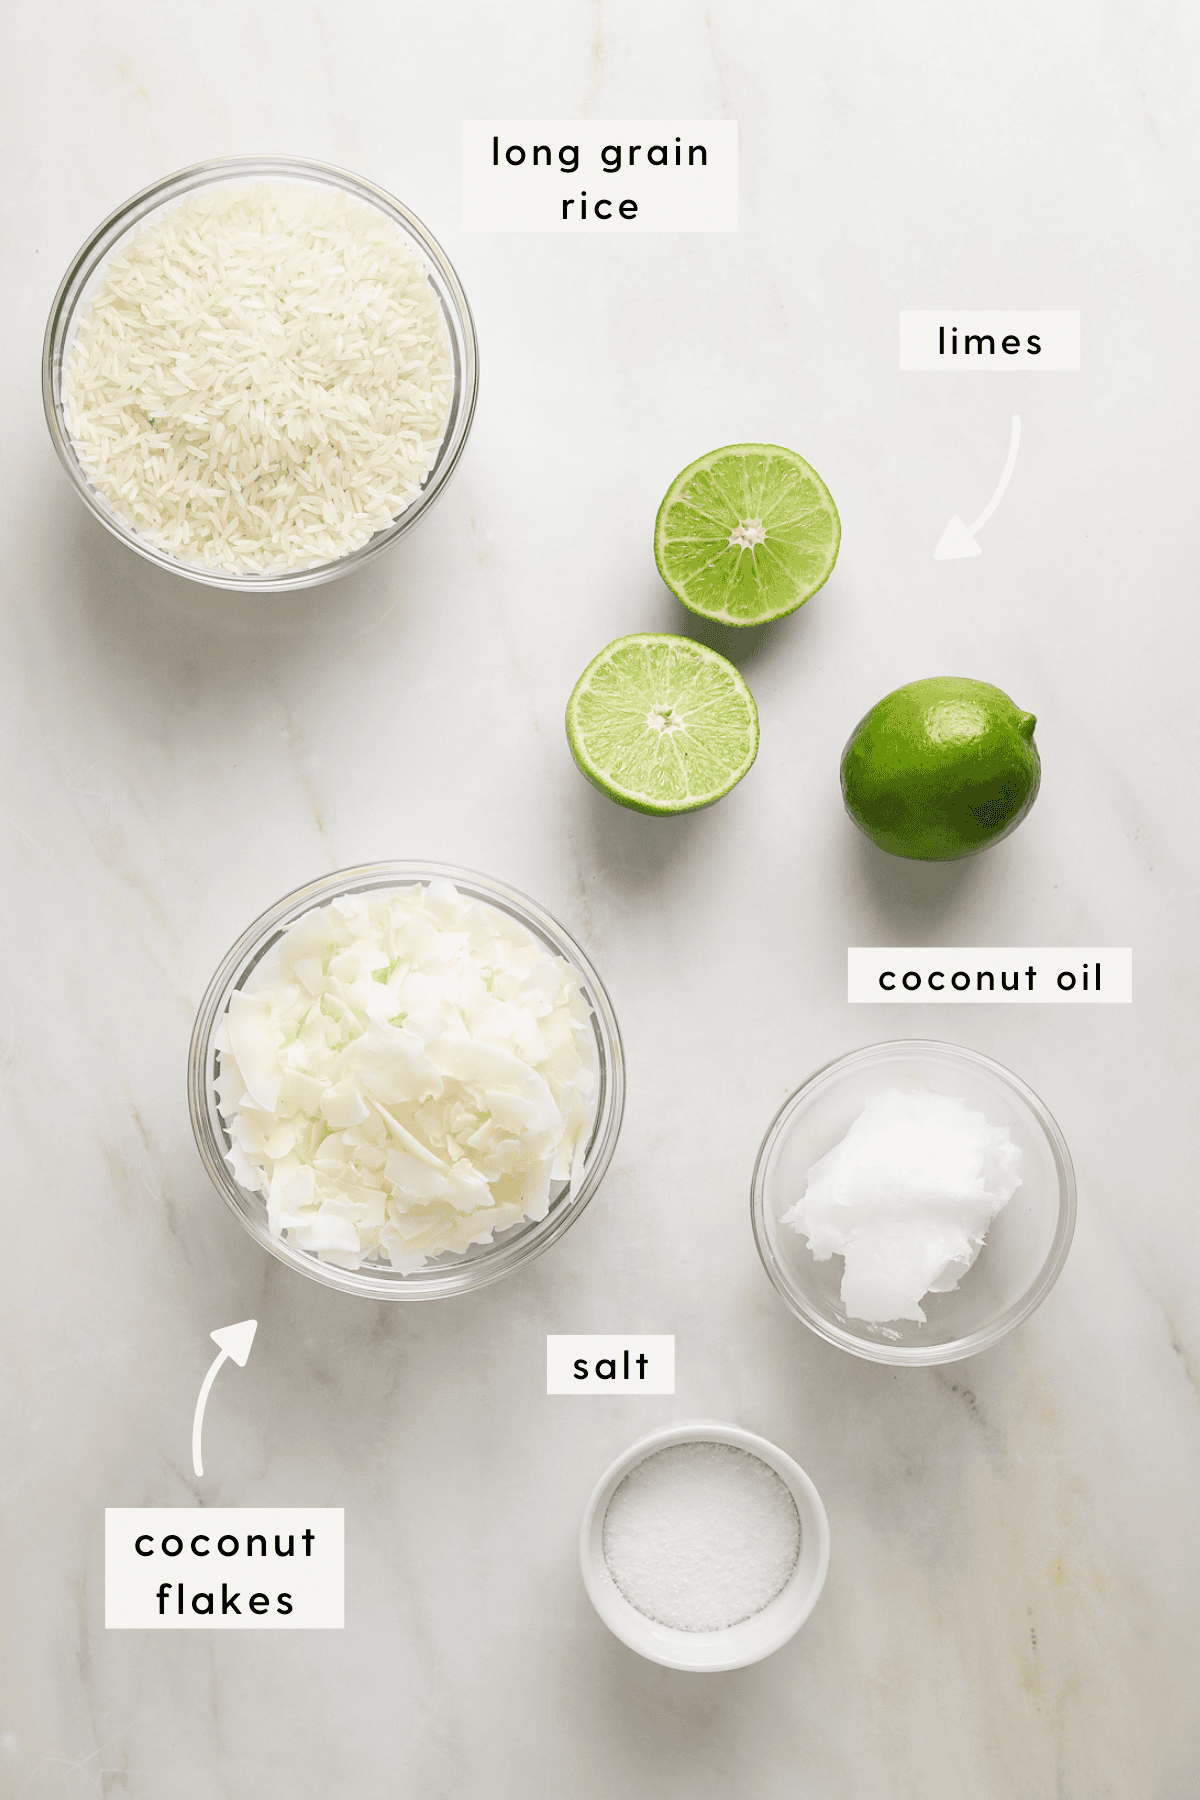 A small bowl of dried rice, three limes, coconut flakes and coconut oil on a marble tabletop.